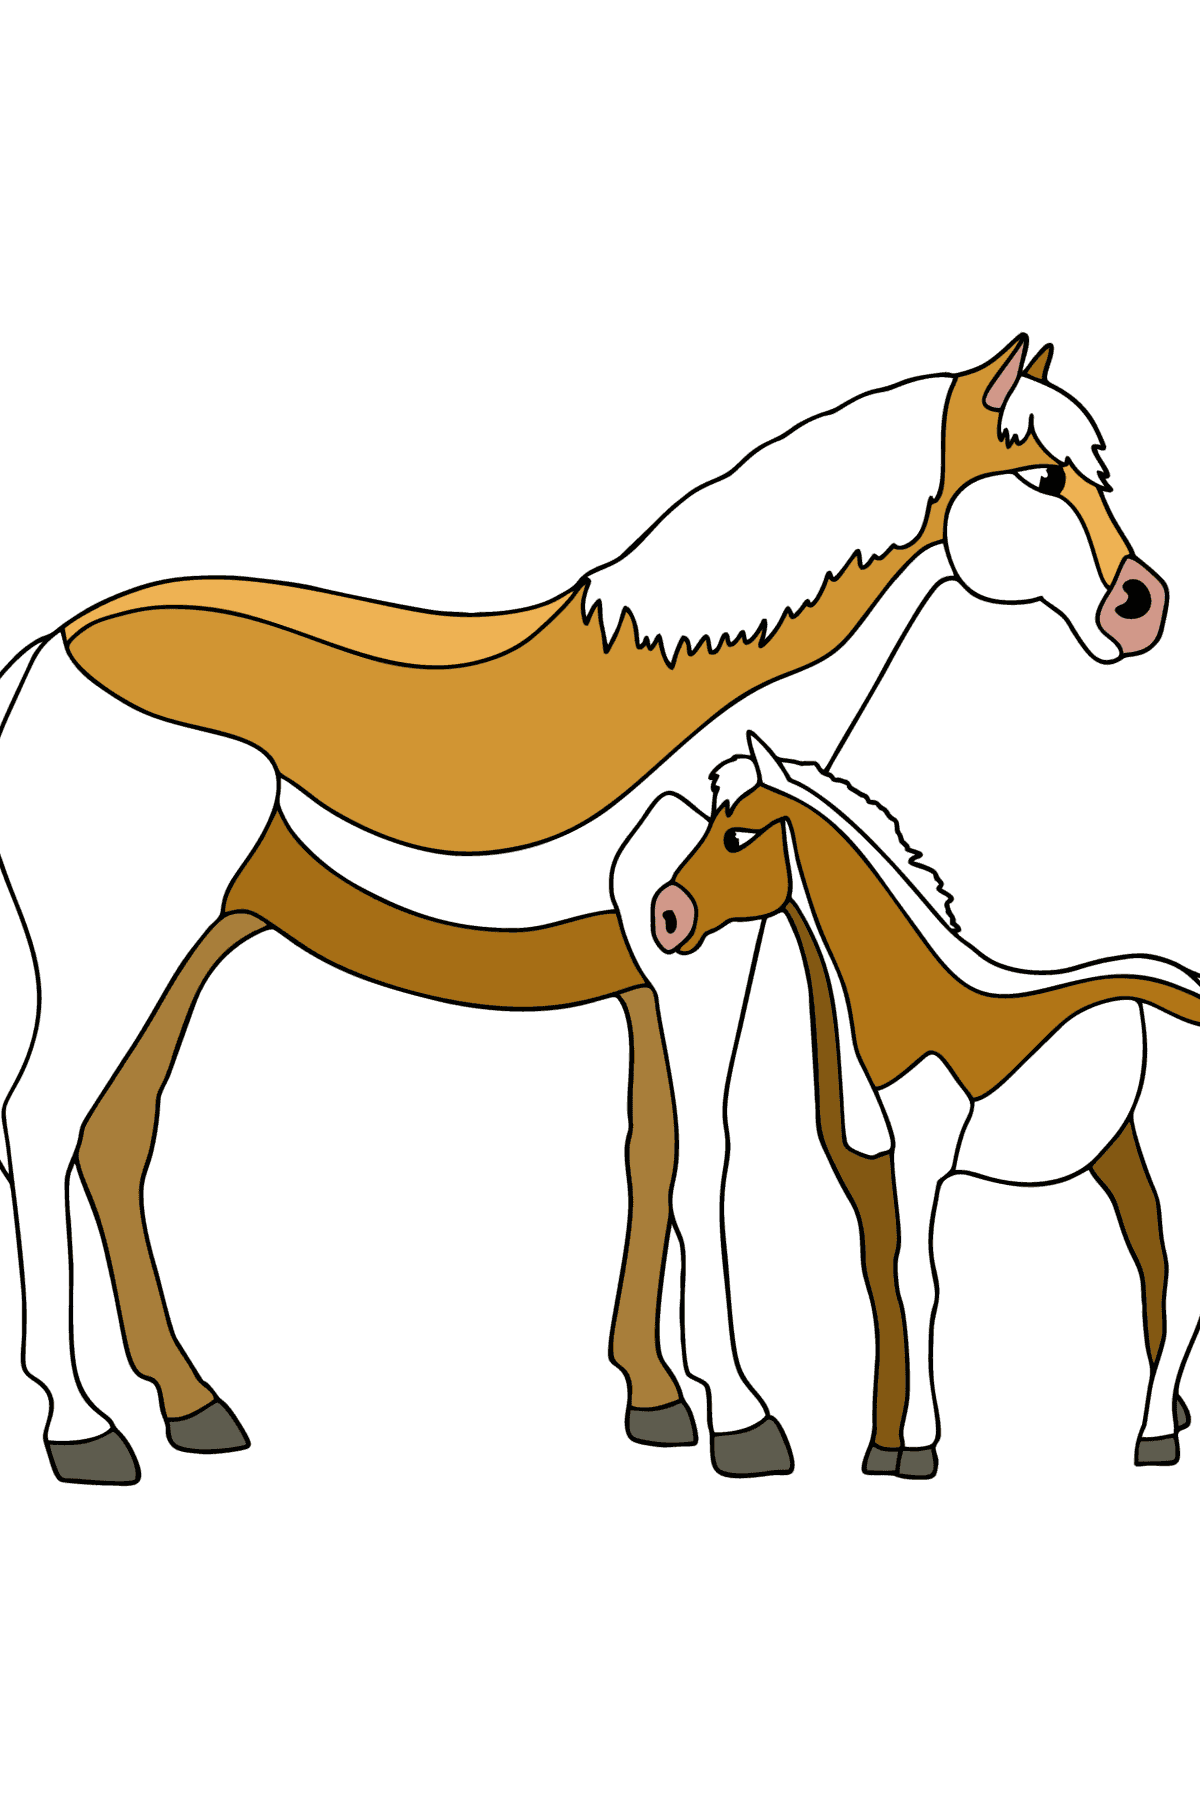 Horse and foal сoloring page - Coloring Pages for Kids